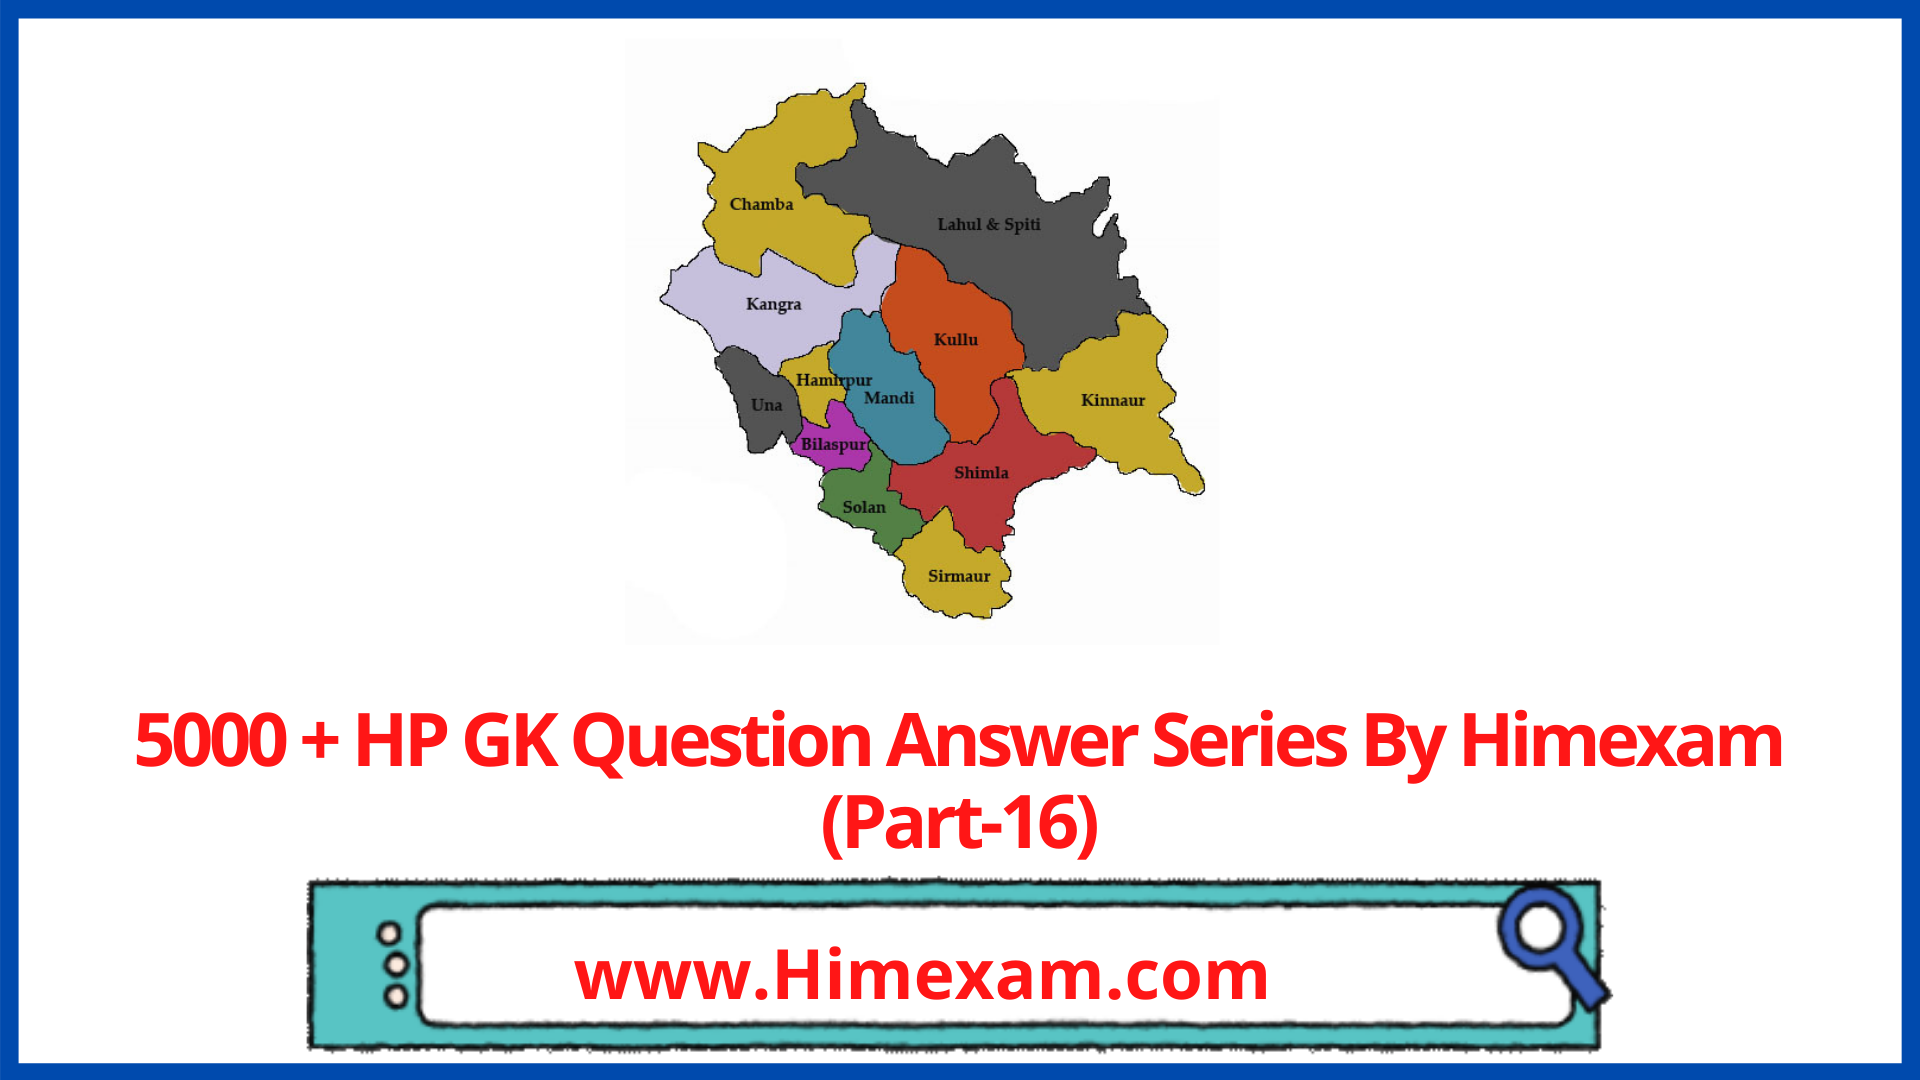 5000 + HP GK Question Answer Series By Himexam (Part-16)